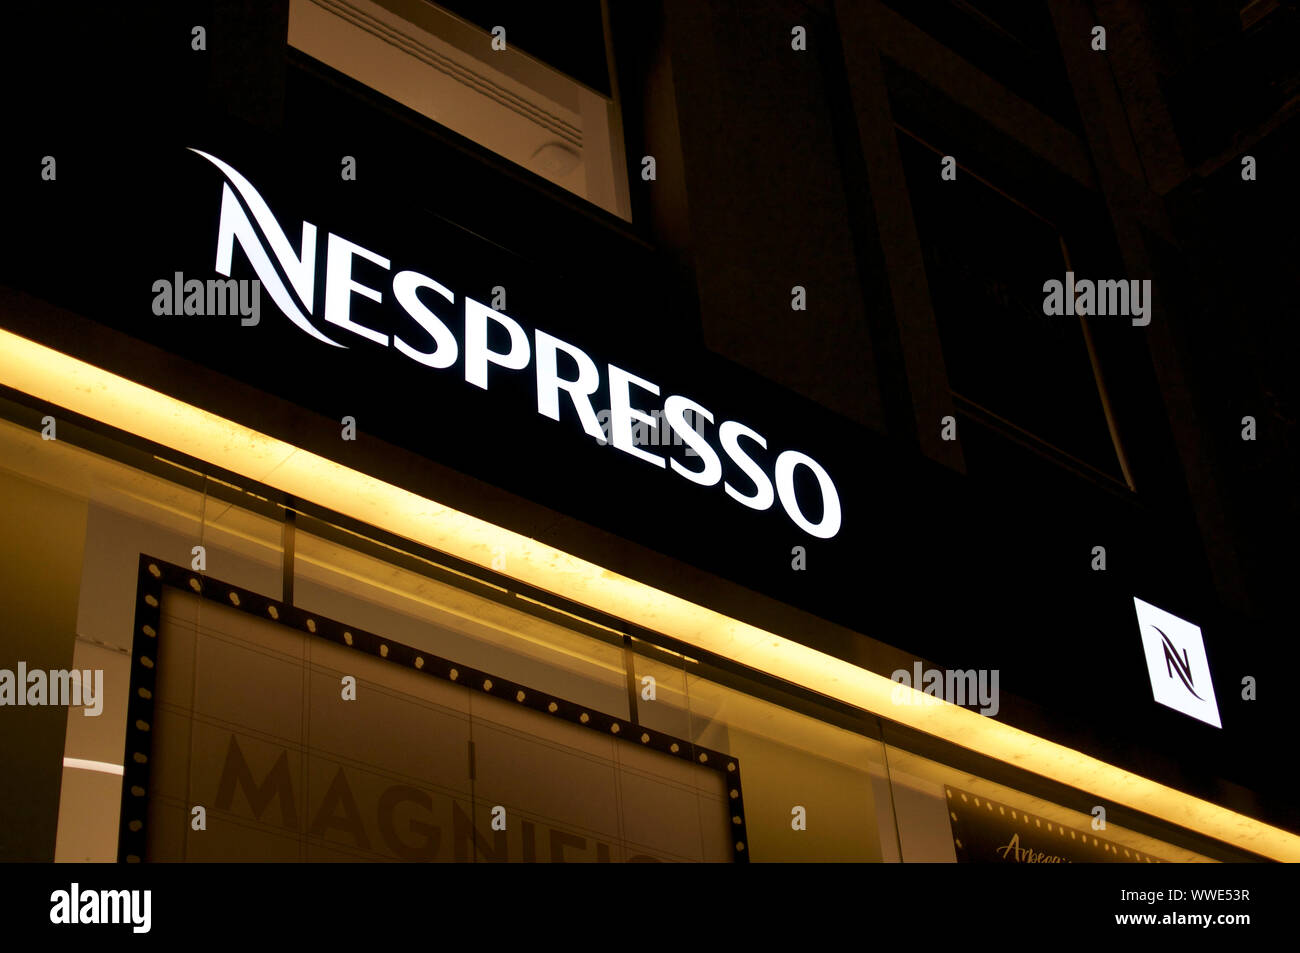 Milano, Lombardy, Italy - 11th September 2019 : View of a illuminated Nespresso Logo hanging in front of a store in Milano, Italy. Nespresso is famous Stock Photo